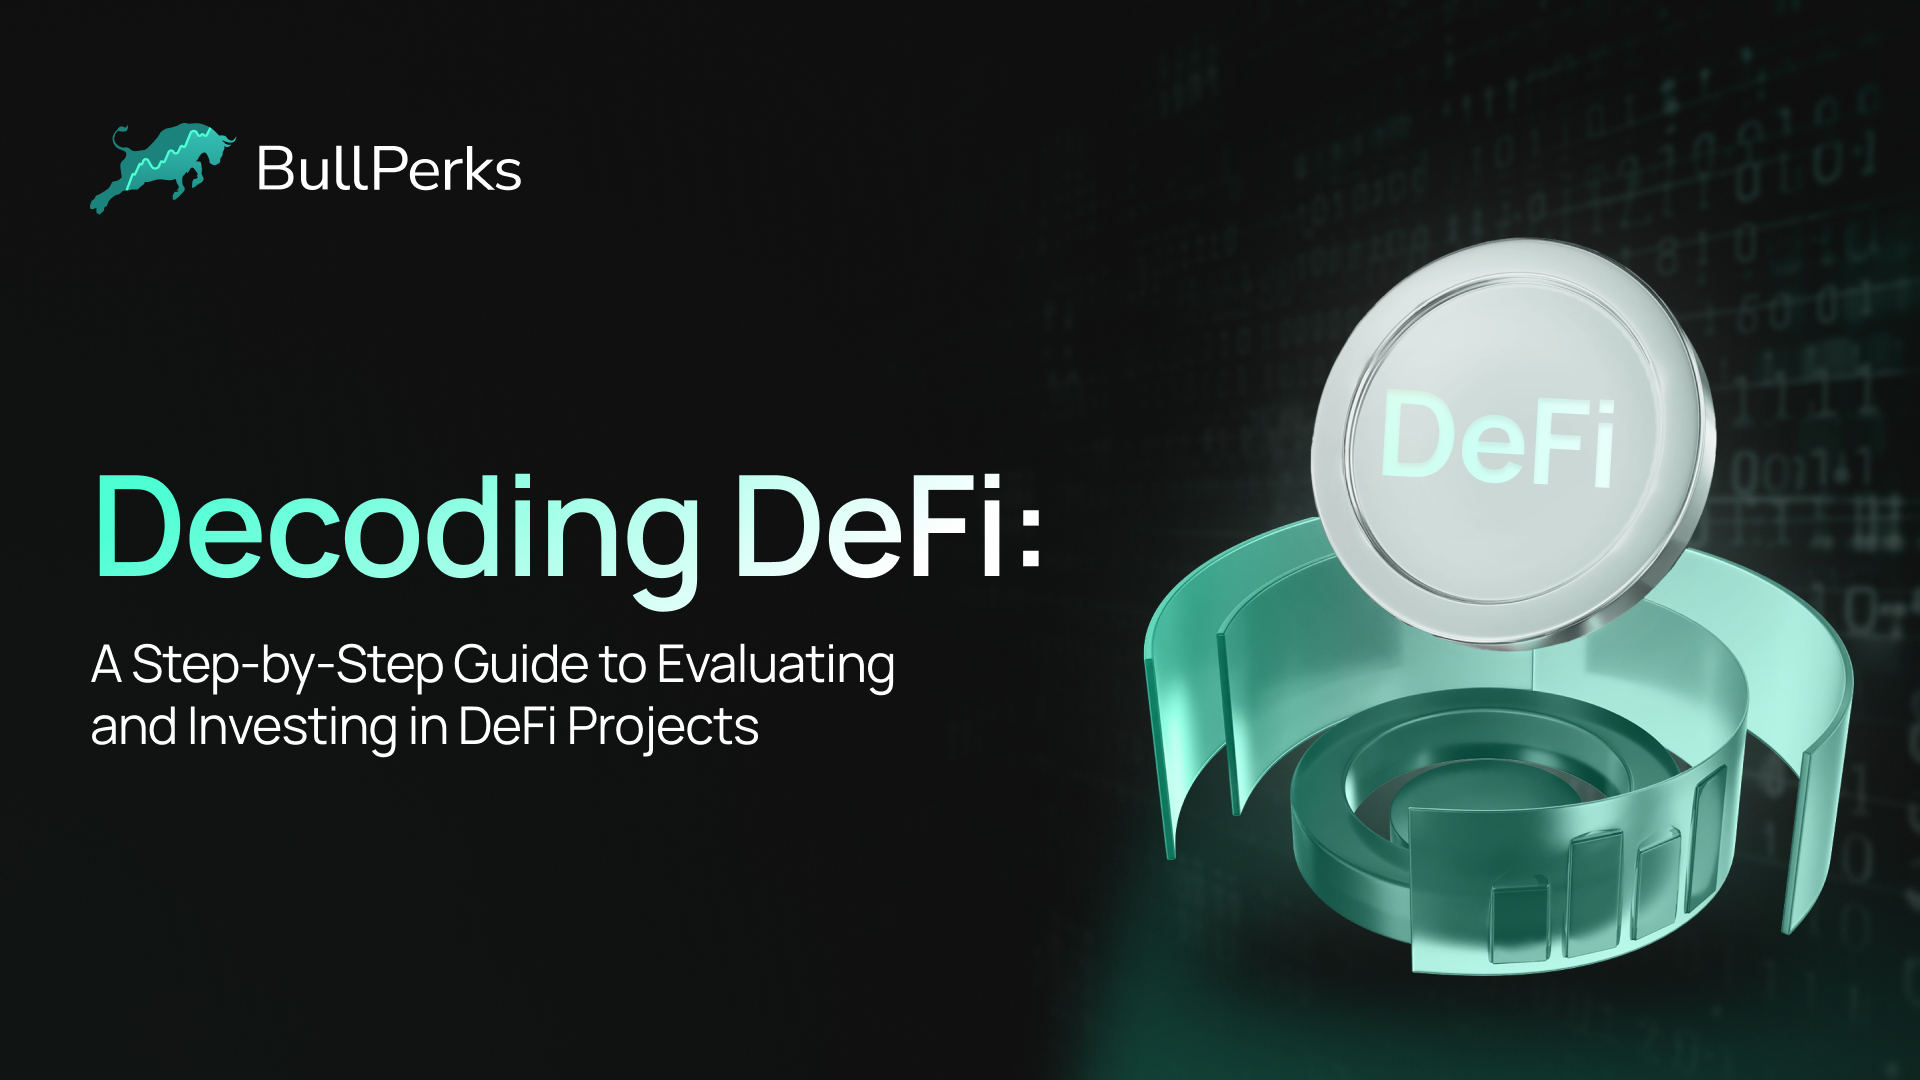 Decoding DeFi: A Step-by-Step Guide to Evaluating and Investing in DeFi Projects 2